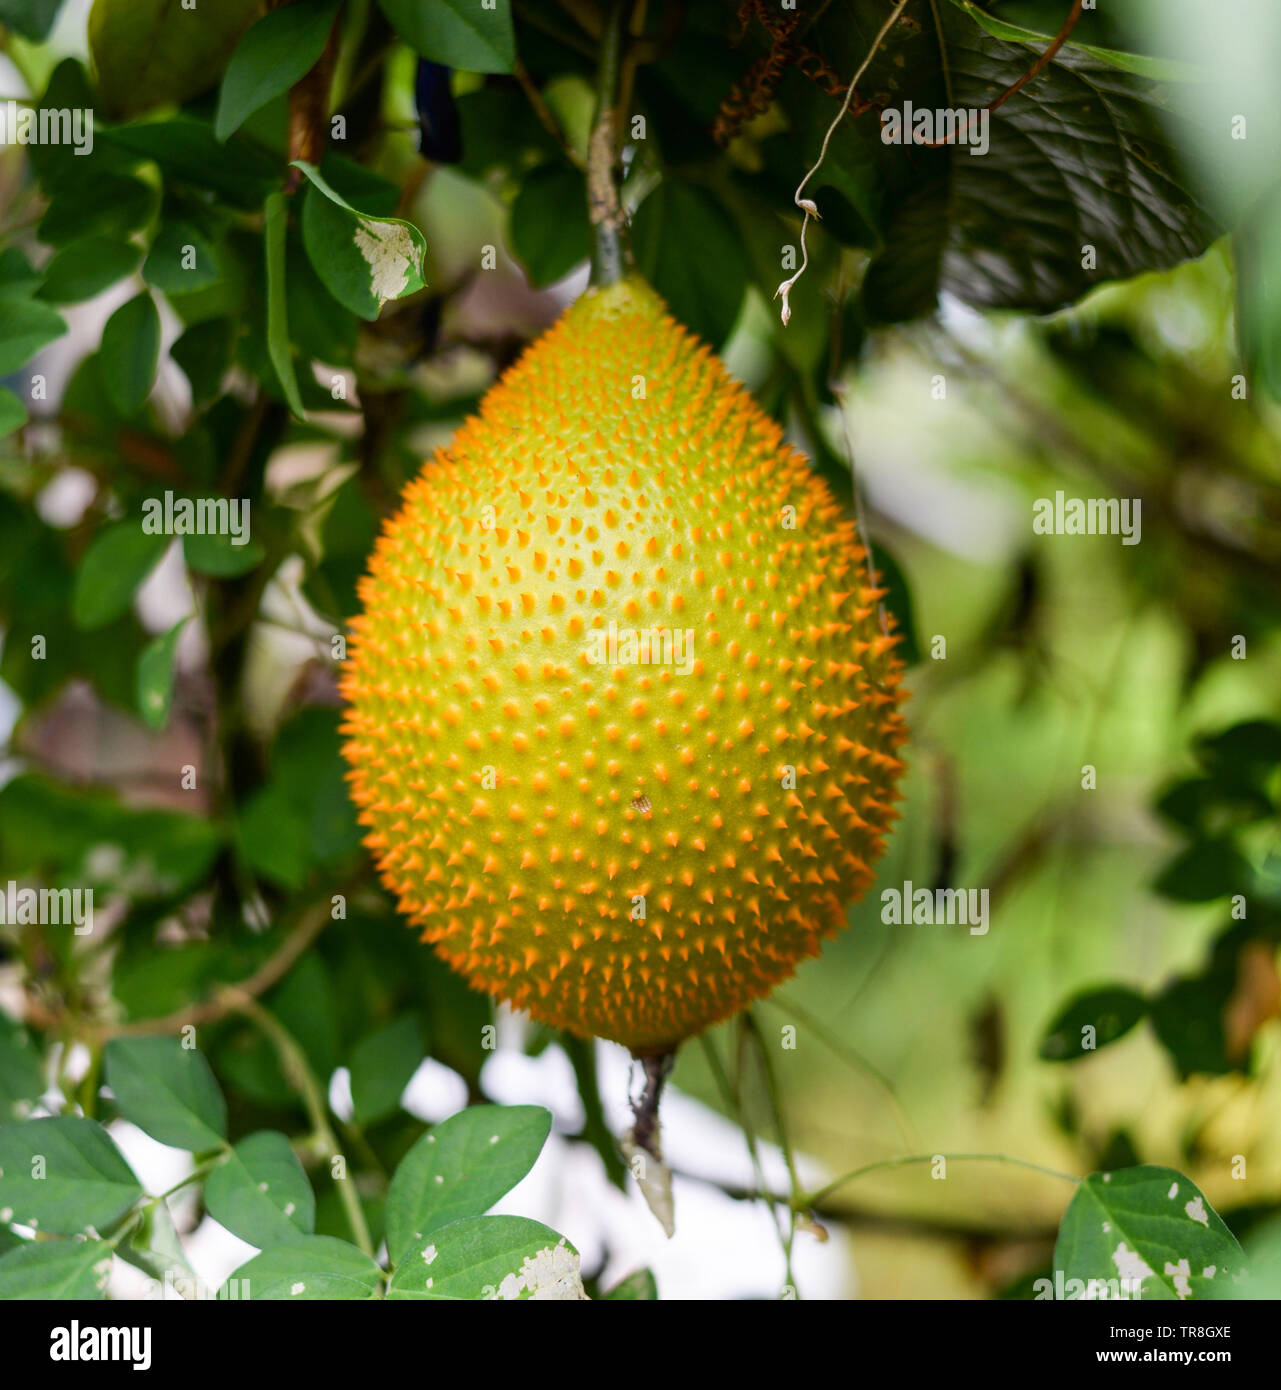 Gac fruit hang on vine in farm / Other names Baby jackfruit, Cochinchin gourd, Spiny bitter gourd Stock Photo